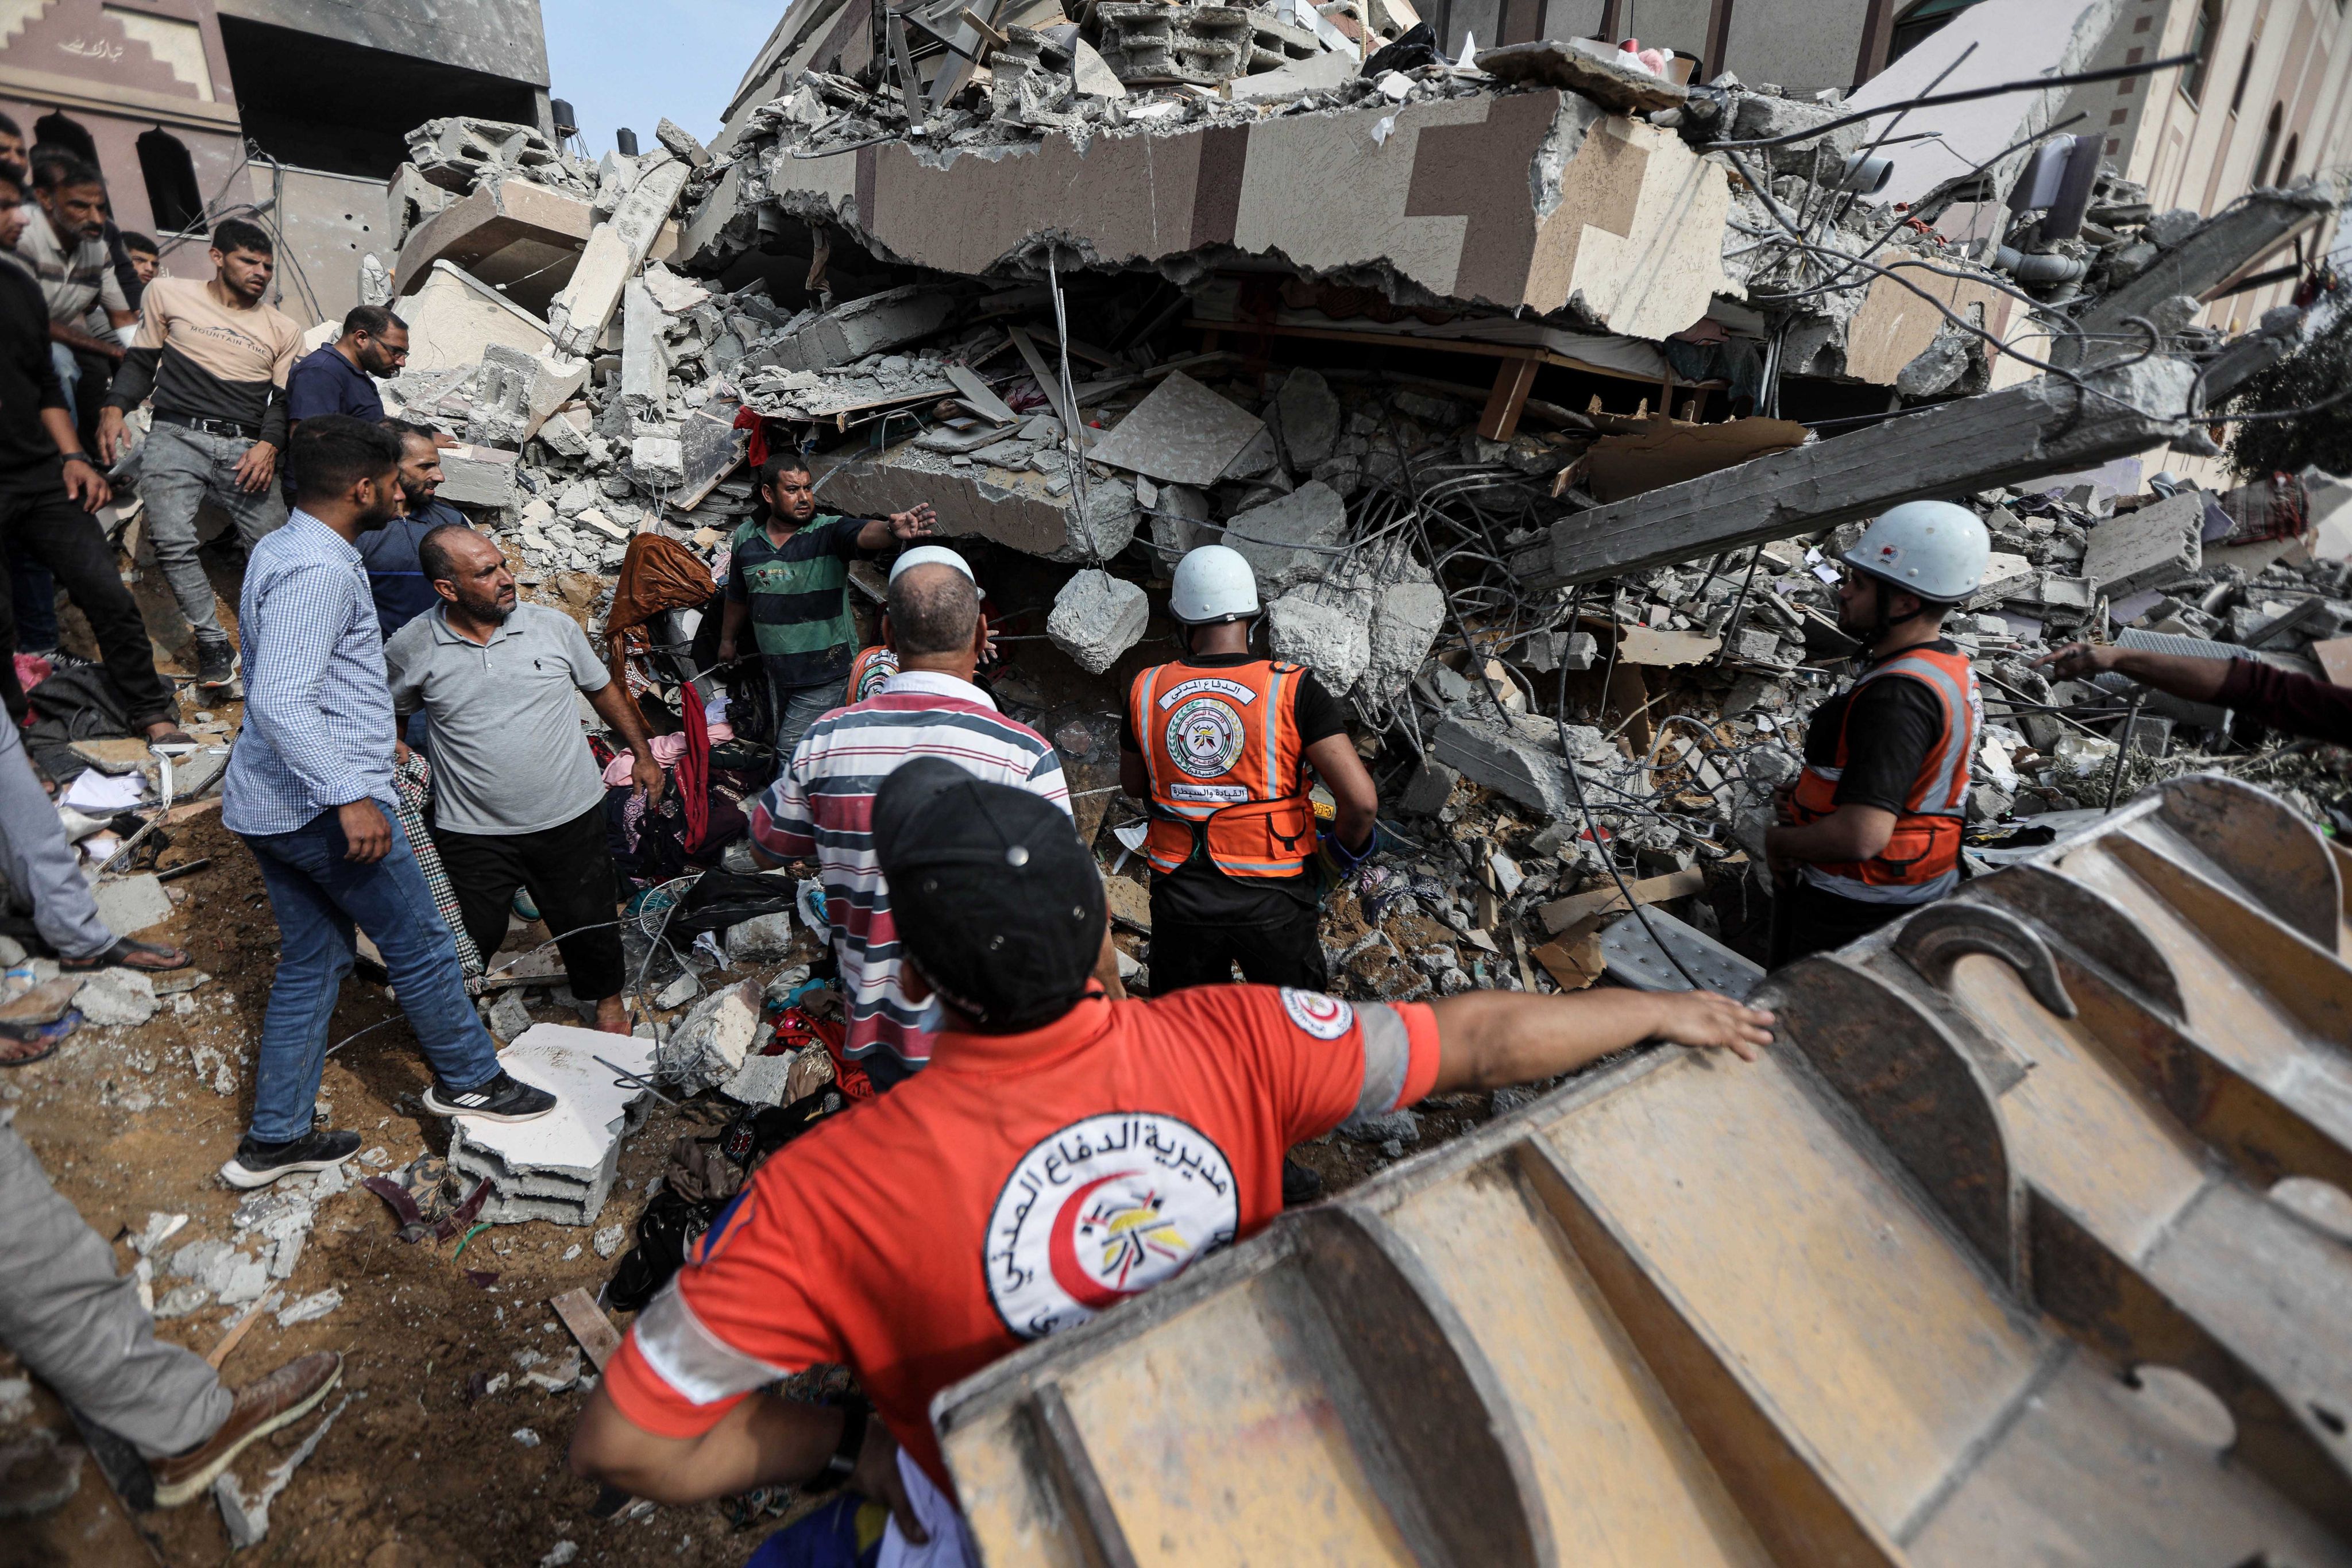 Palestinians search for victims among the rubble of a destroyed house in Khan Yunis following an Israeli airstrike on the second day of the ongoing conflict between Israel and the Palestinian militant group Hamas. Photo: DPA